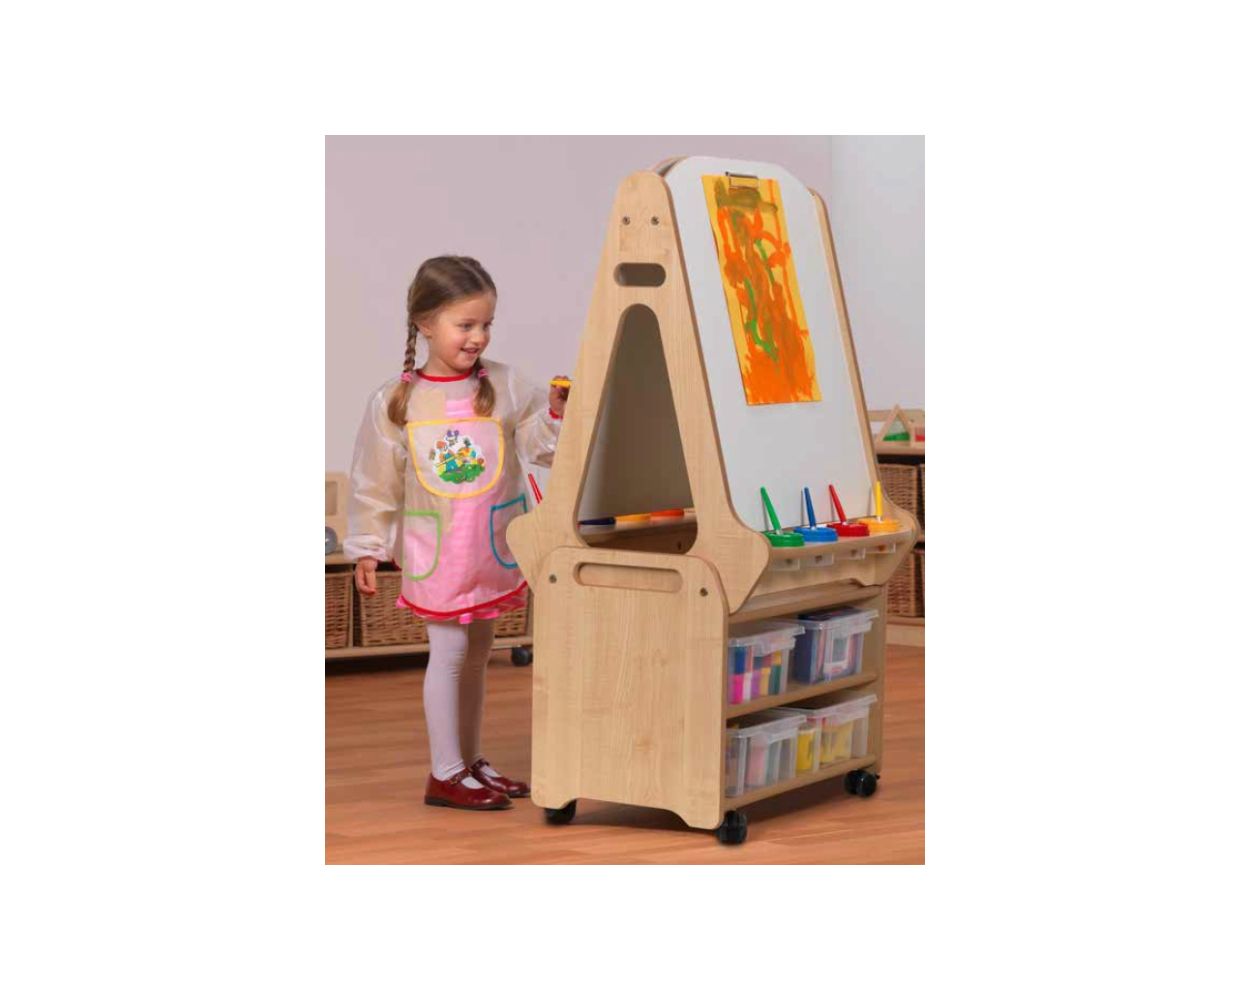 Double Sided 2 Station Easel Whiteboard Easel by Millhouse